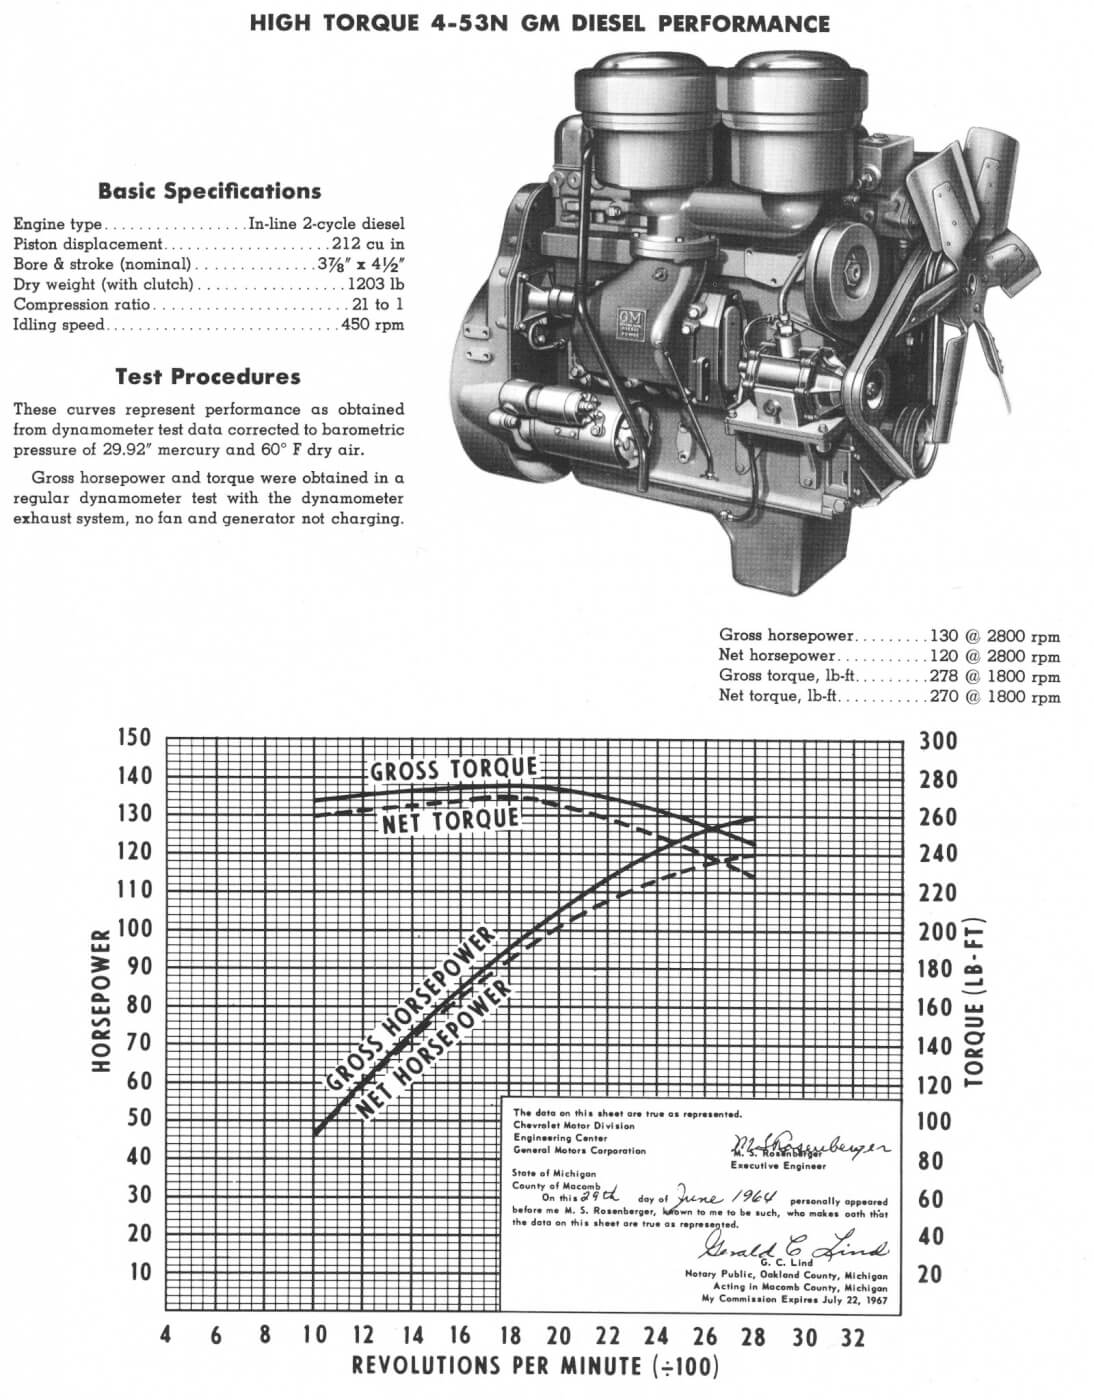 Here’s the generic data on a 4-53N from the same era. Note the blower is on the opposite side as the unit in the tractor. This was optional, as was left or right rotation.